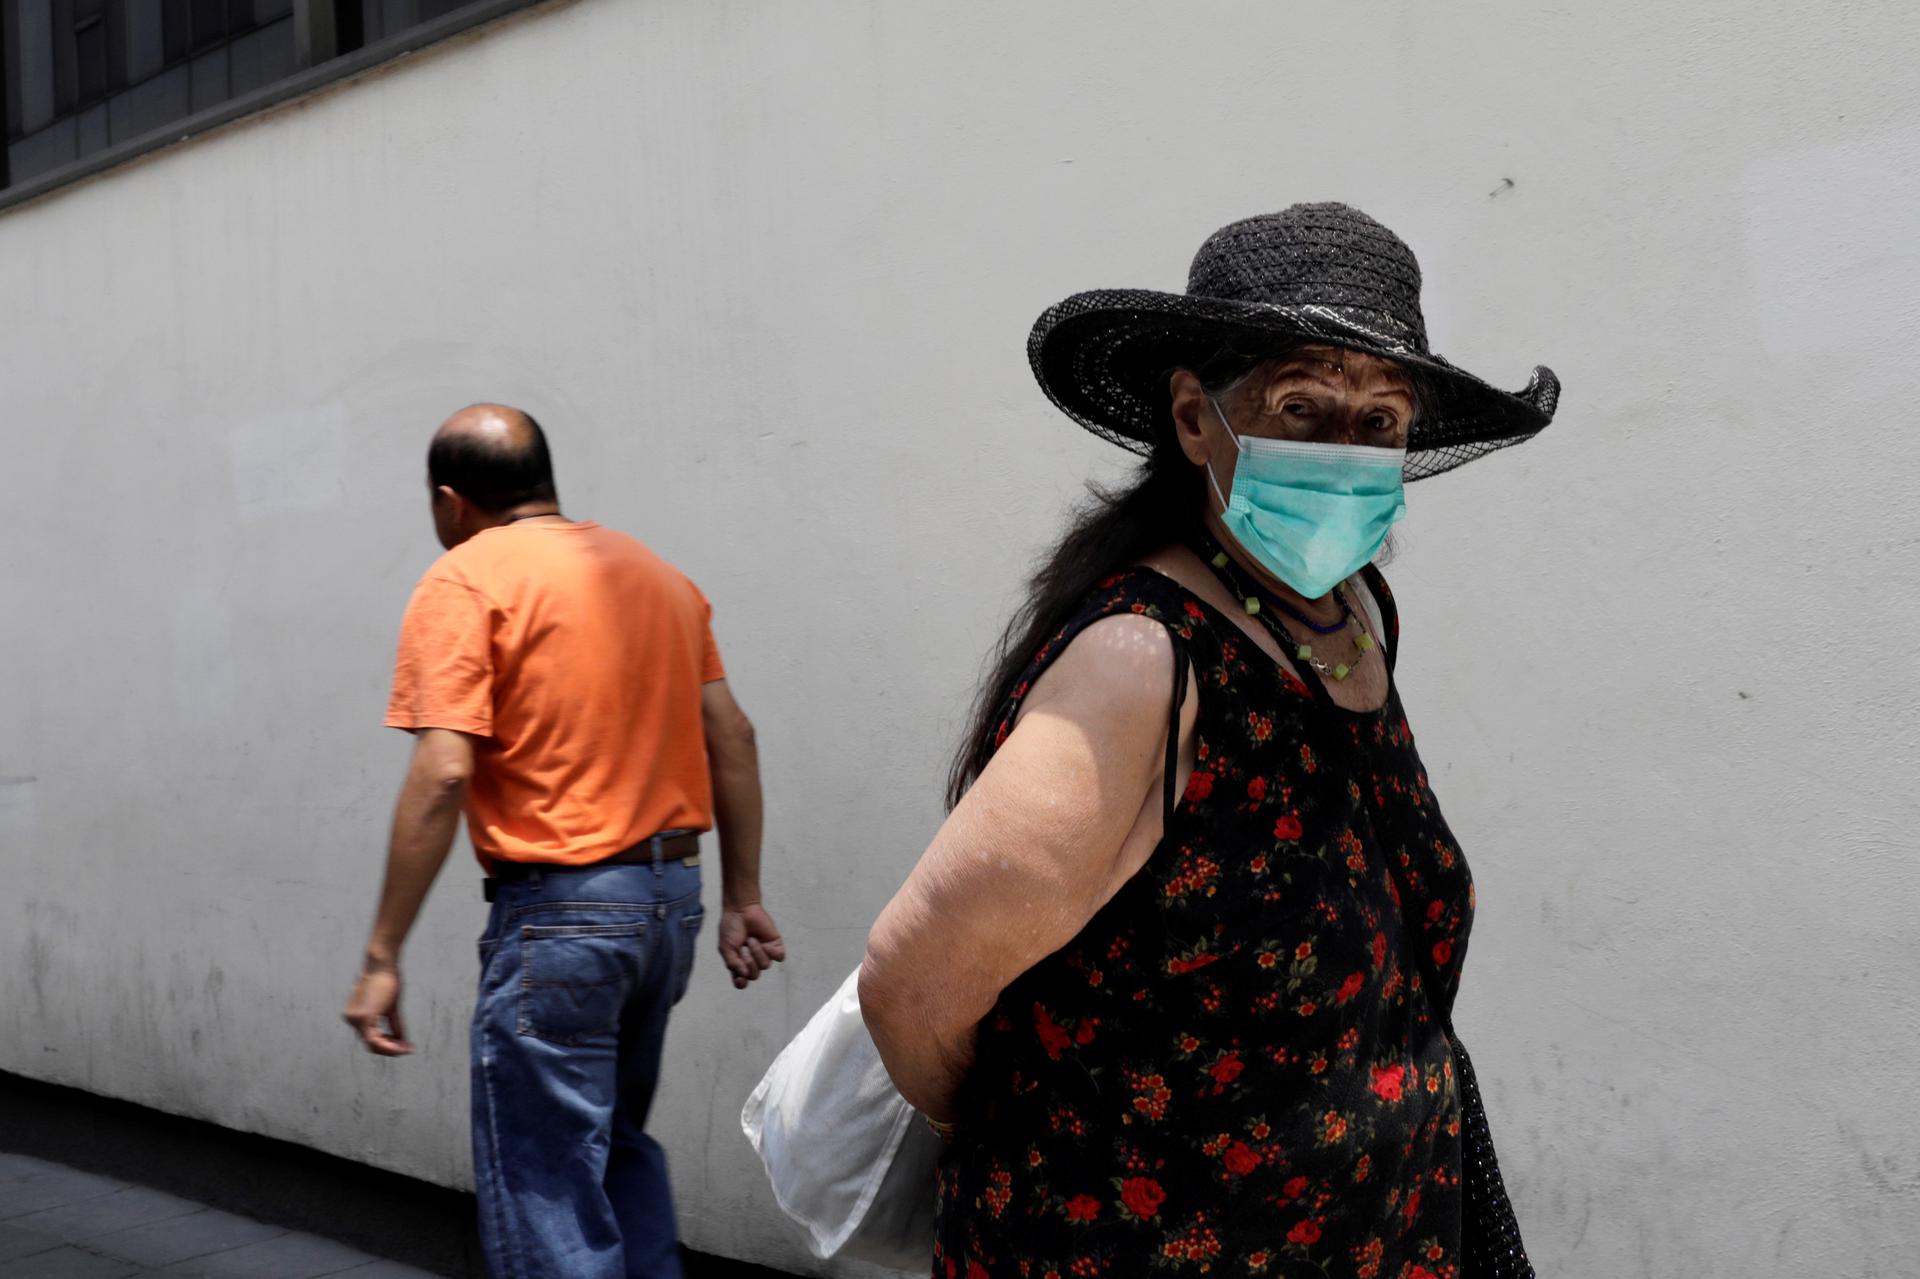 An older woman wears a surgical mask as she looks at the camera